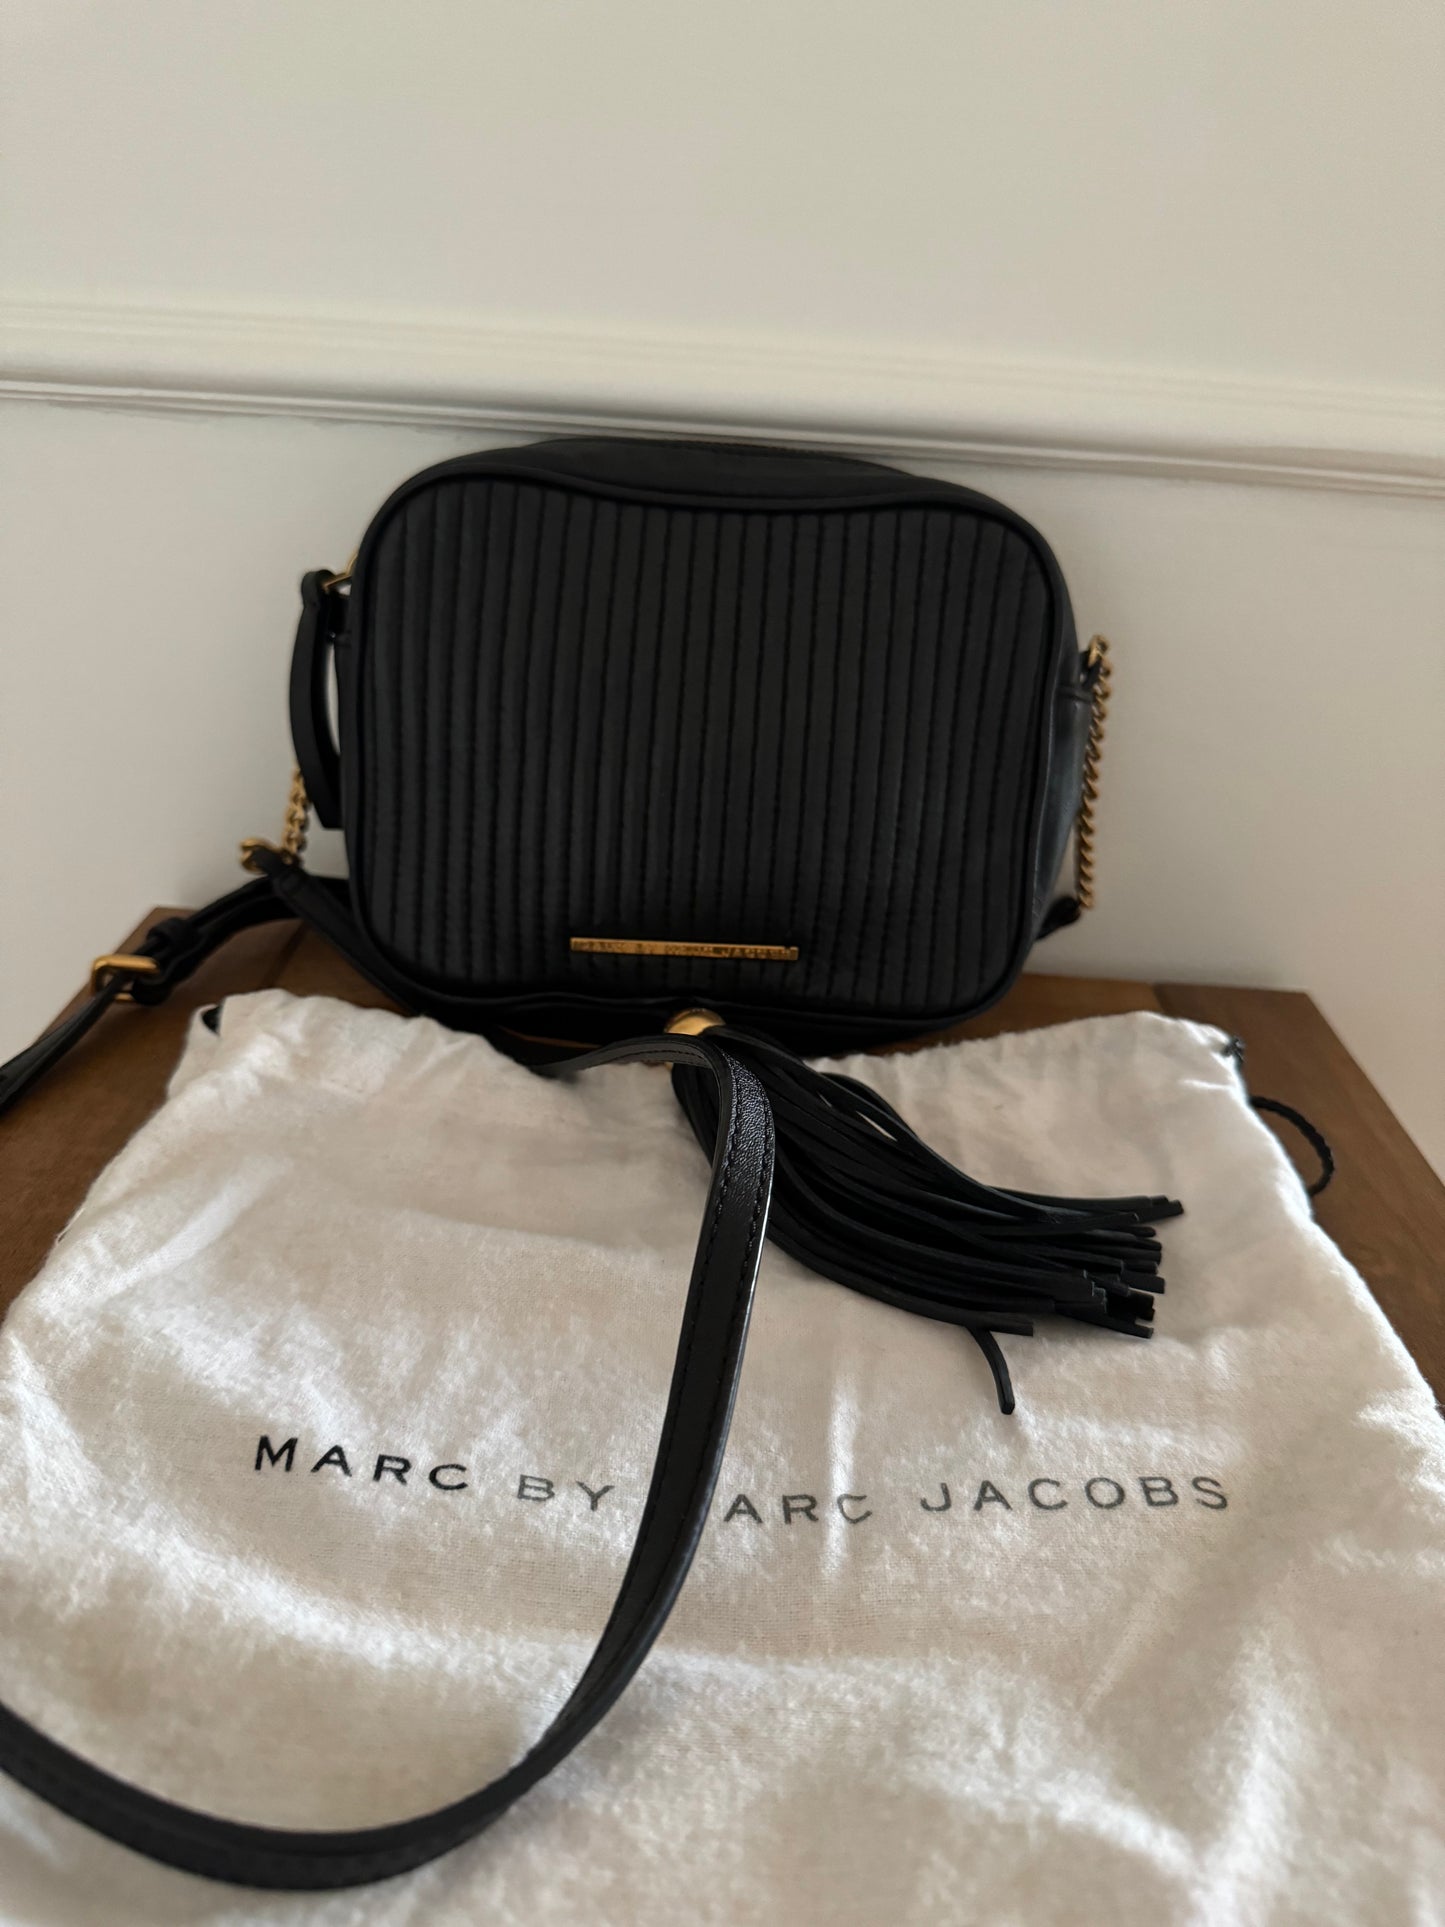 Marc by Marc jacobs